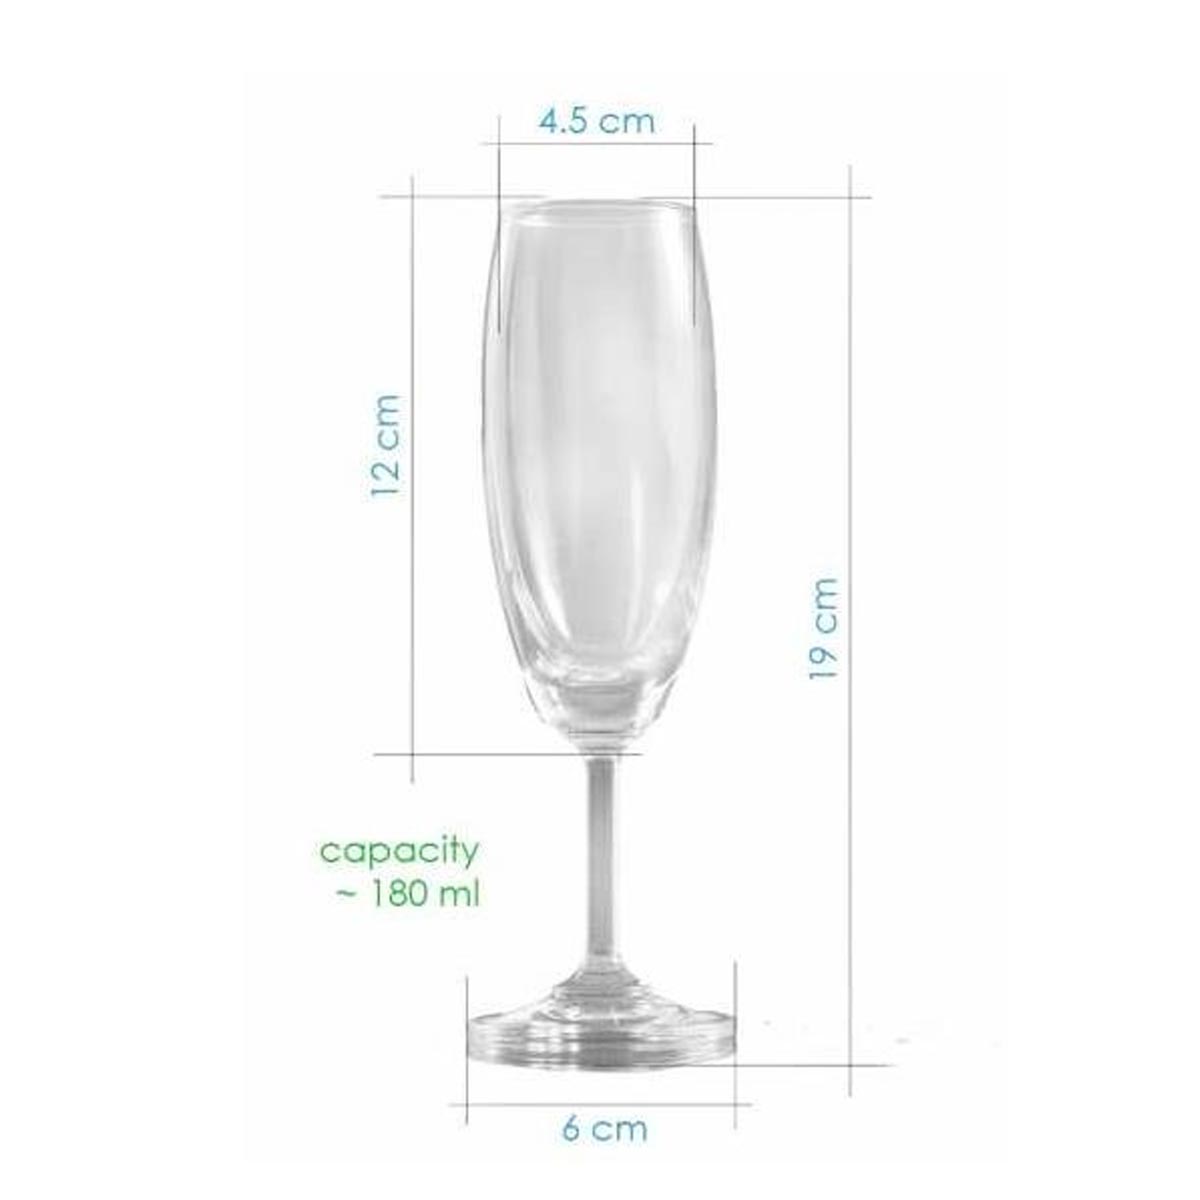 Initials Engraved Champagne Glasses | Set of 2 | Engraved Date - withmuchlove